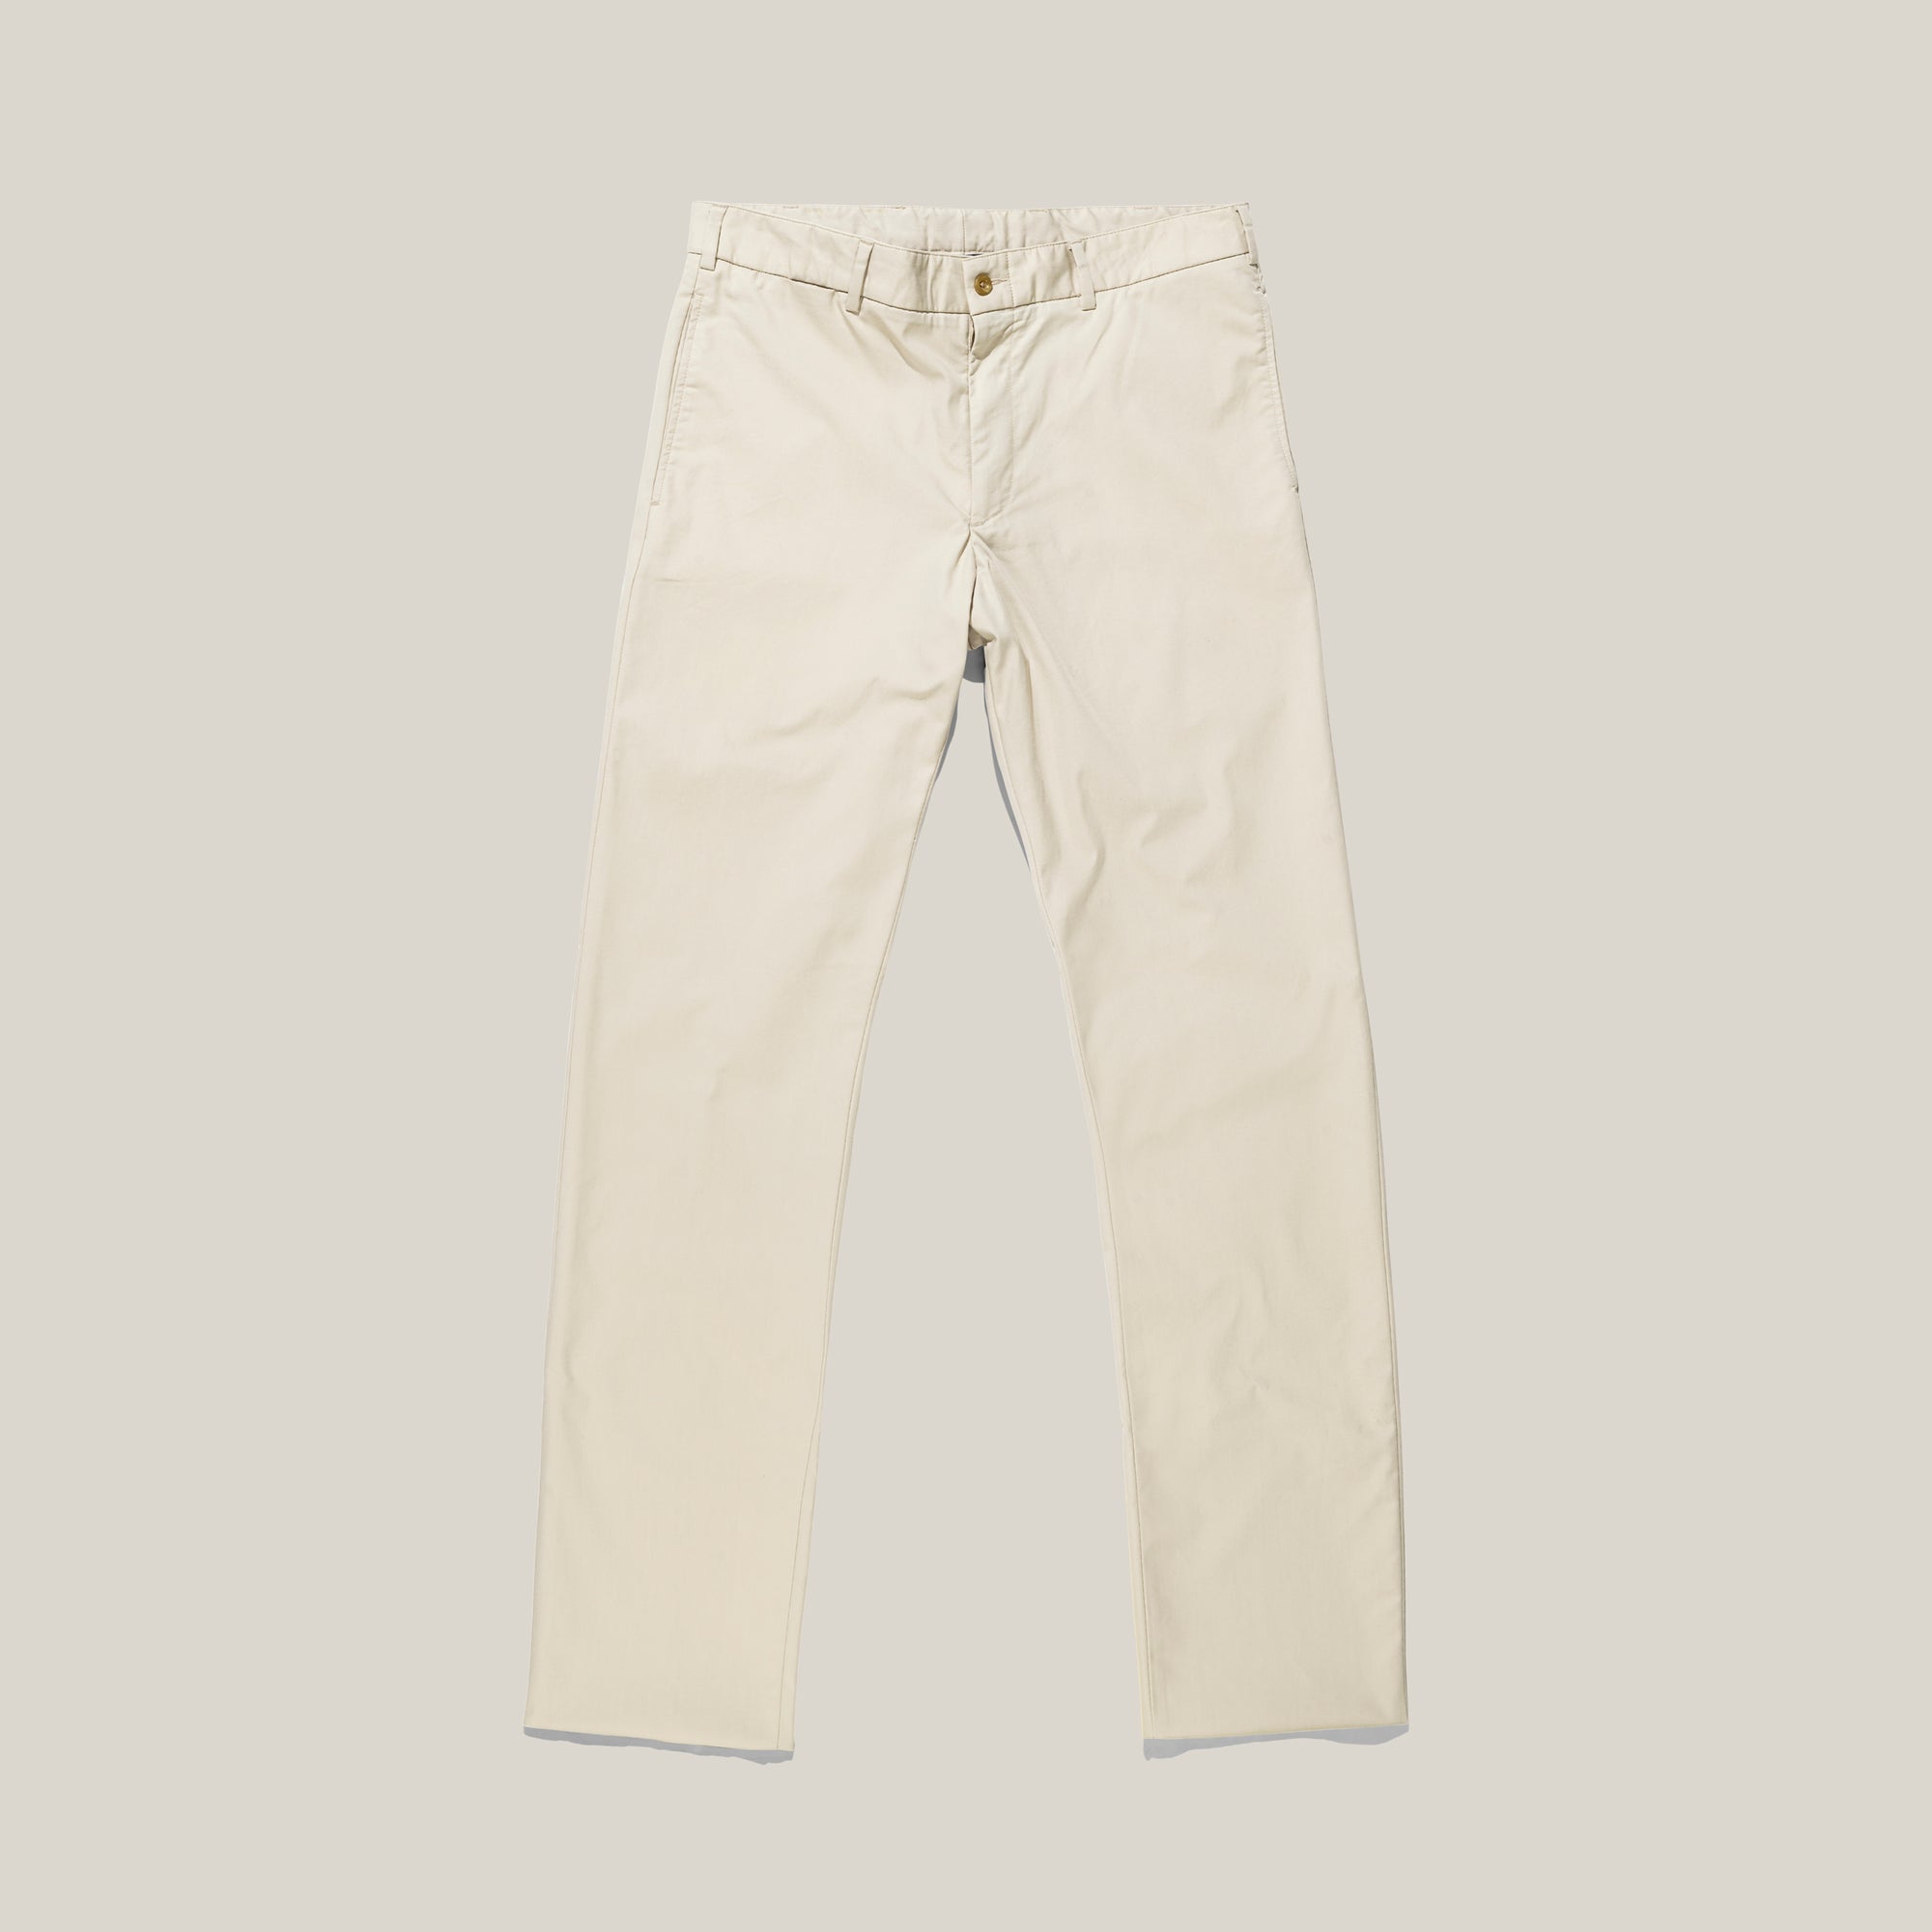 M2 Classic Fit Travel Twills in Cement by Bills Khakis